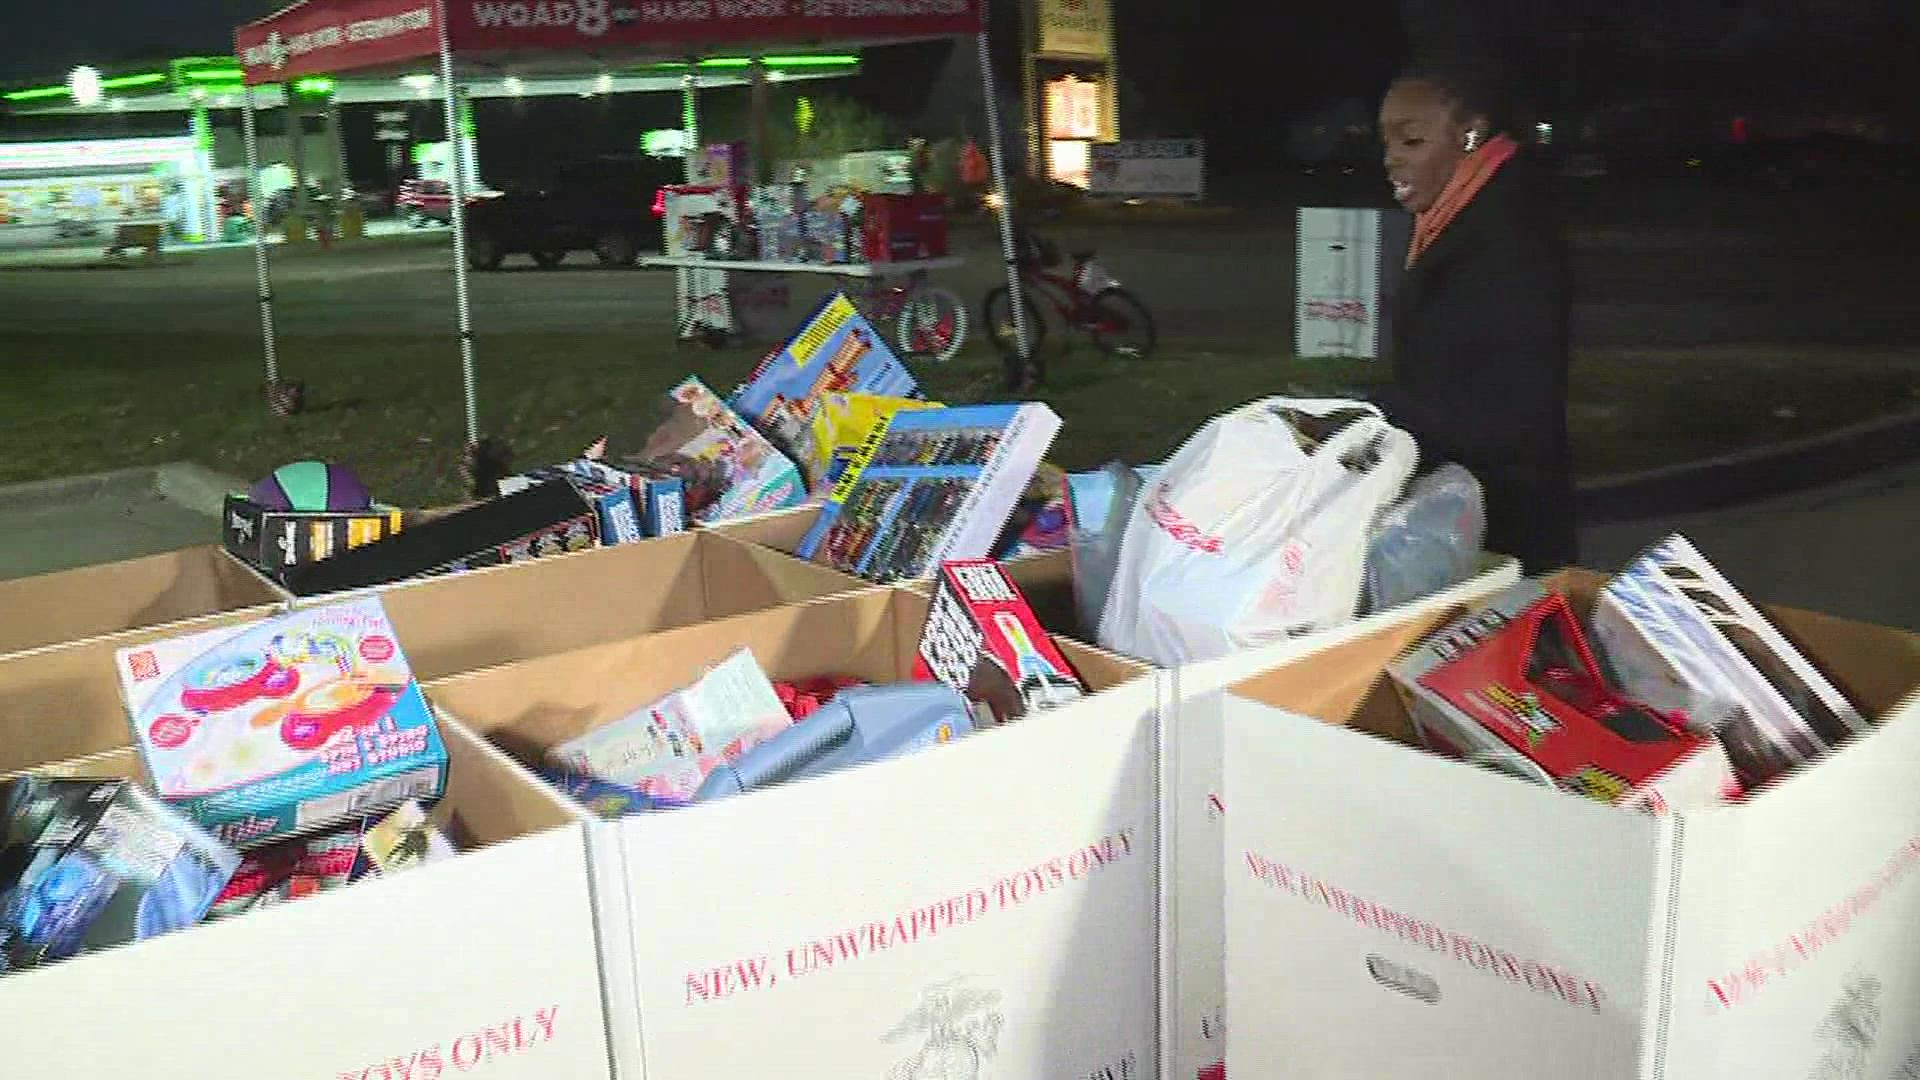 WQAD's 2021 Toys for Tots collection day